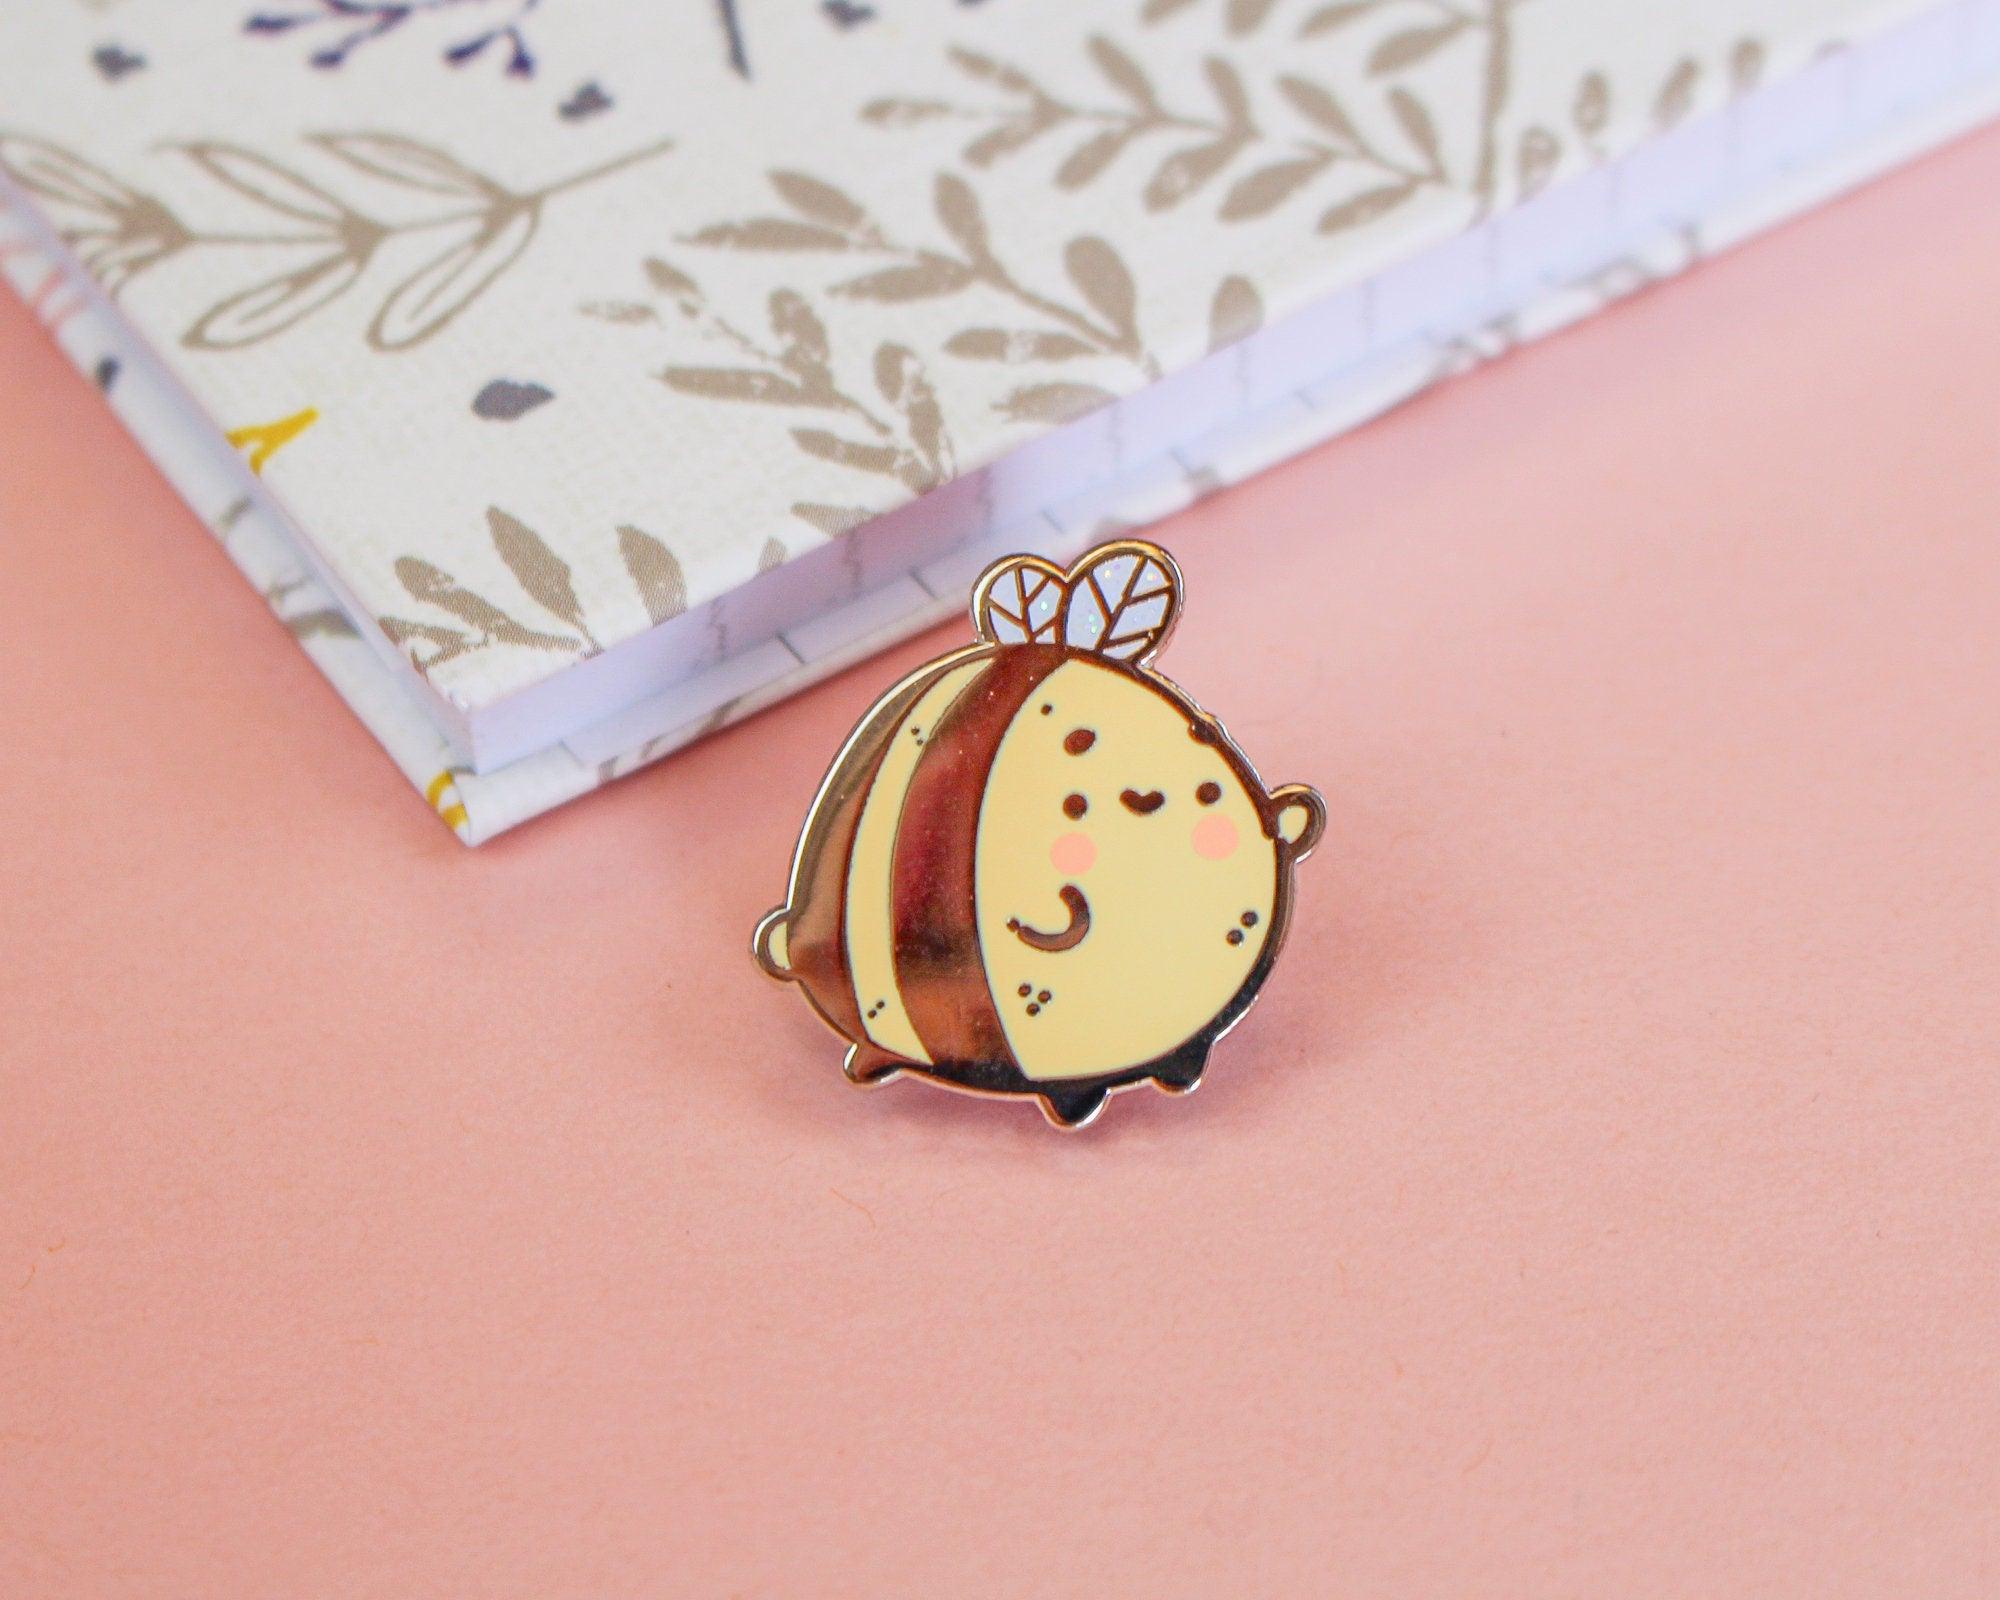 Enamel pin featuring a cute bumble bee design, perfect for jackets, bags, and clothing. 2